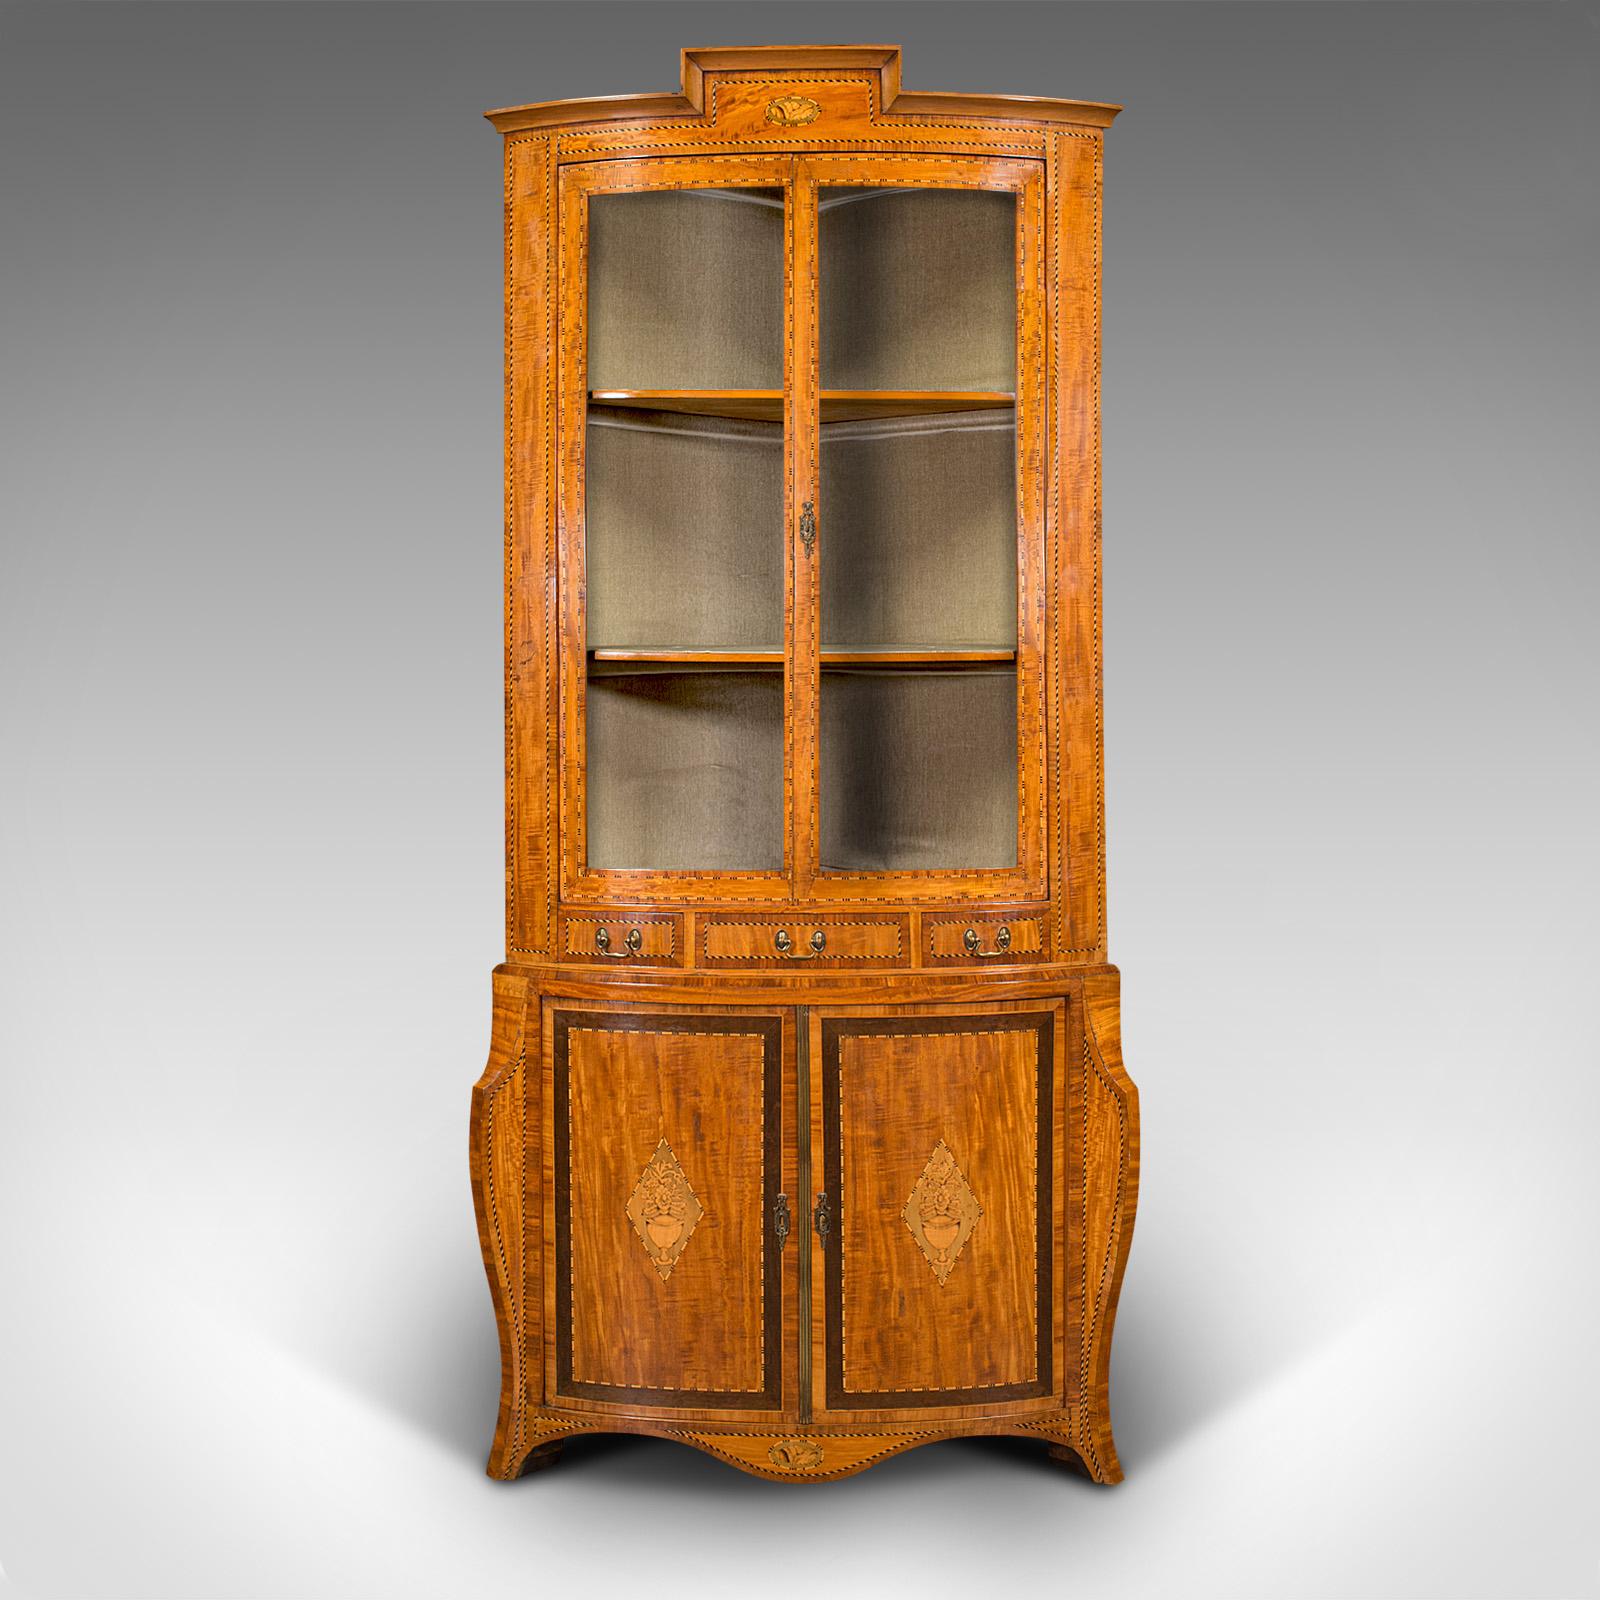 This is an antique showcase corner cabinet. A Dutch, satinwood bow-front display case, dating to the late Victorian period, circa 1880.

Of exemplary aesthetic appeal, with a striking finish and craftsmanship
Displays a desirable aged patina and